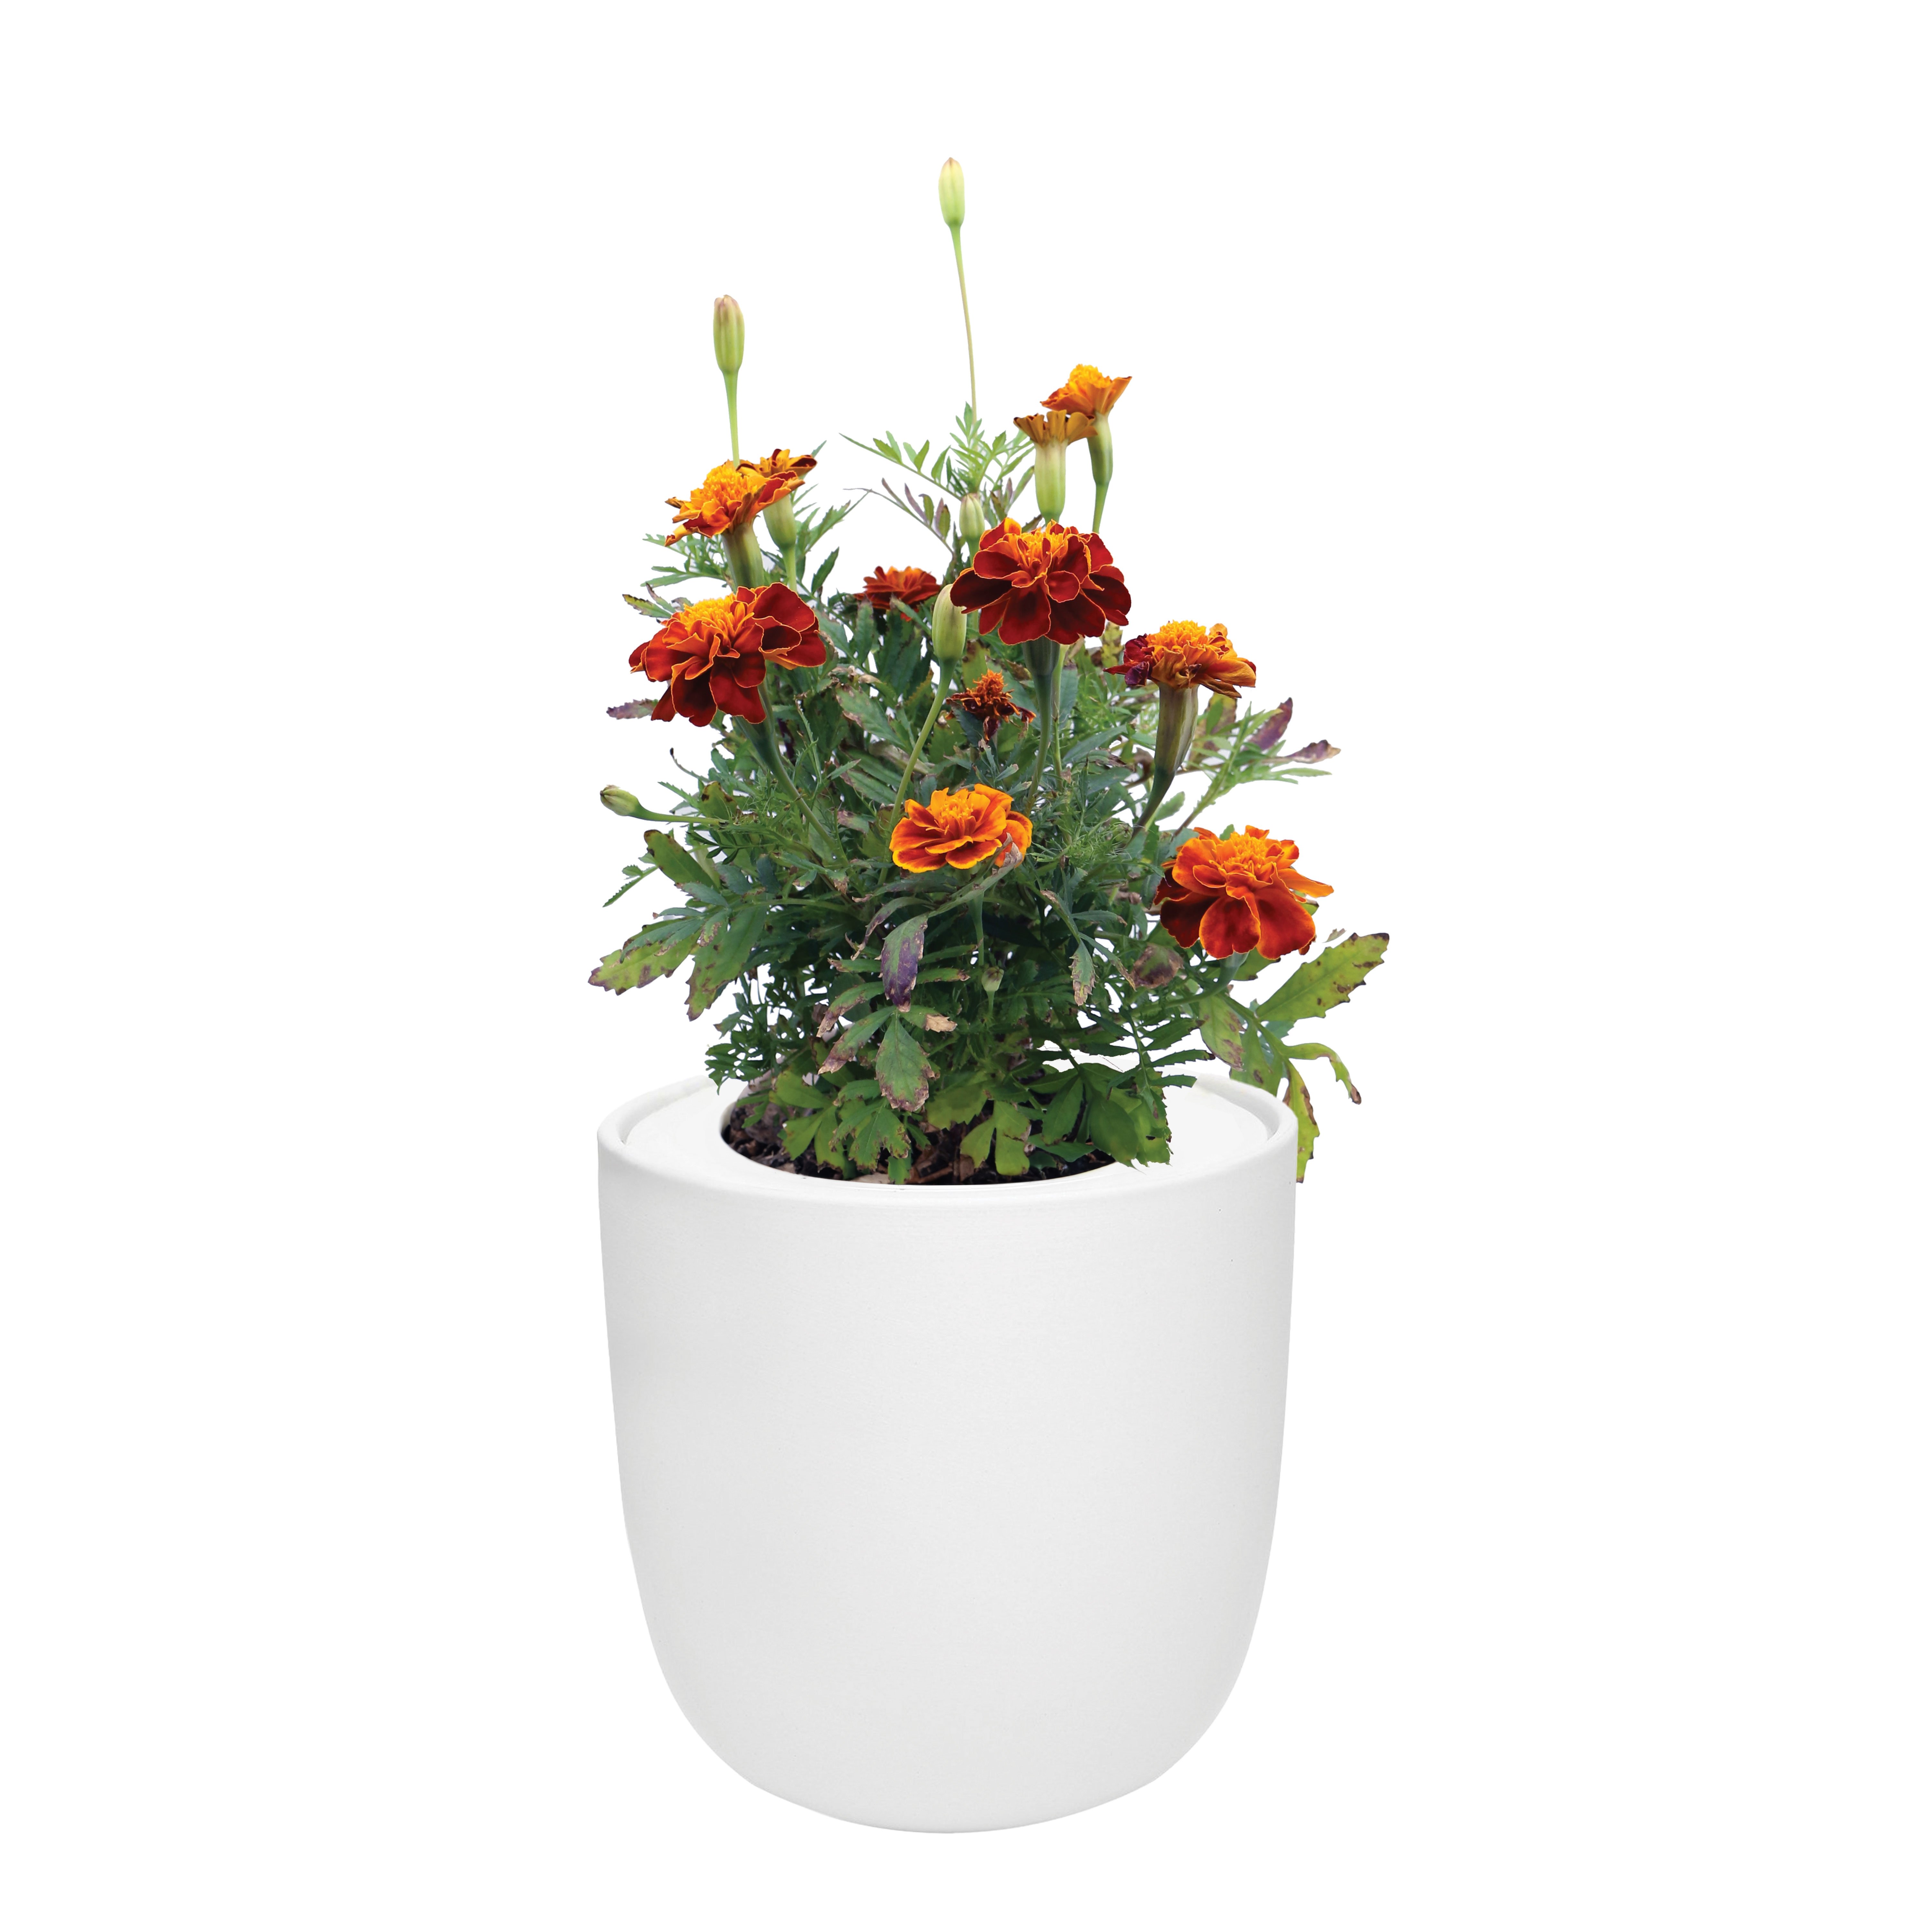 Marigold - French Double Dwarf White Ceramic Pot Hydroponic Growing Kit with Seeds